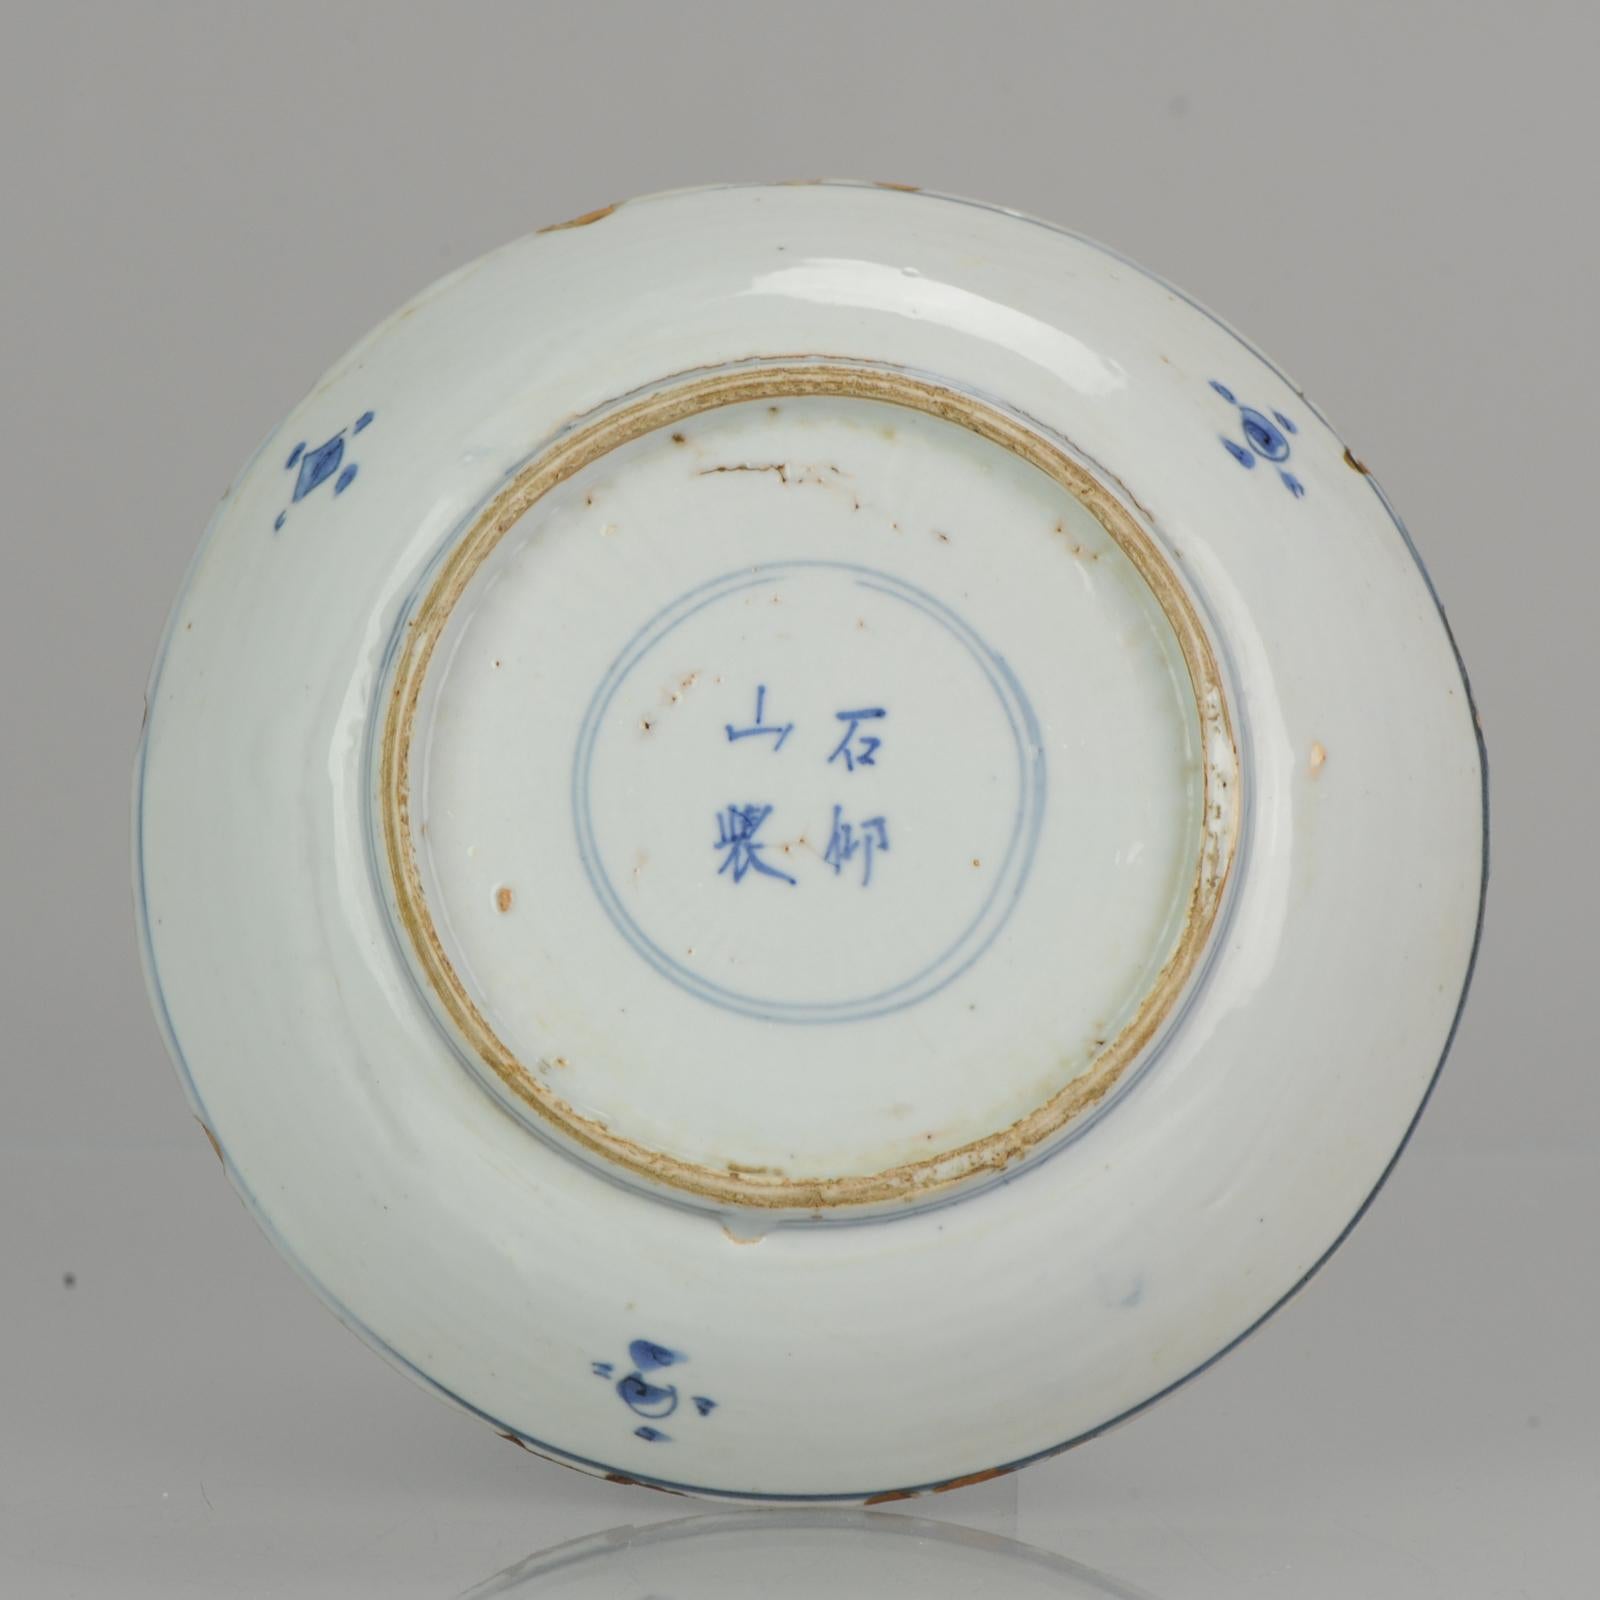 Lovely and rare Chinese porcelain plate from the early 17th century.

Central scene of the well known Shou Lao, God of Longevity, flying on a crane among the clouds.
In the front of him are the 8 immortals with attributes in a garden/landscape